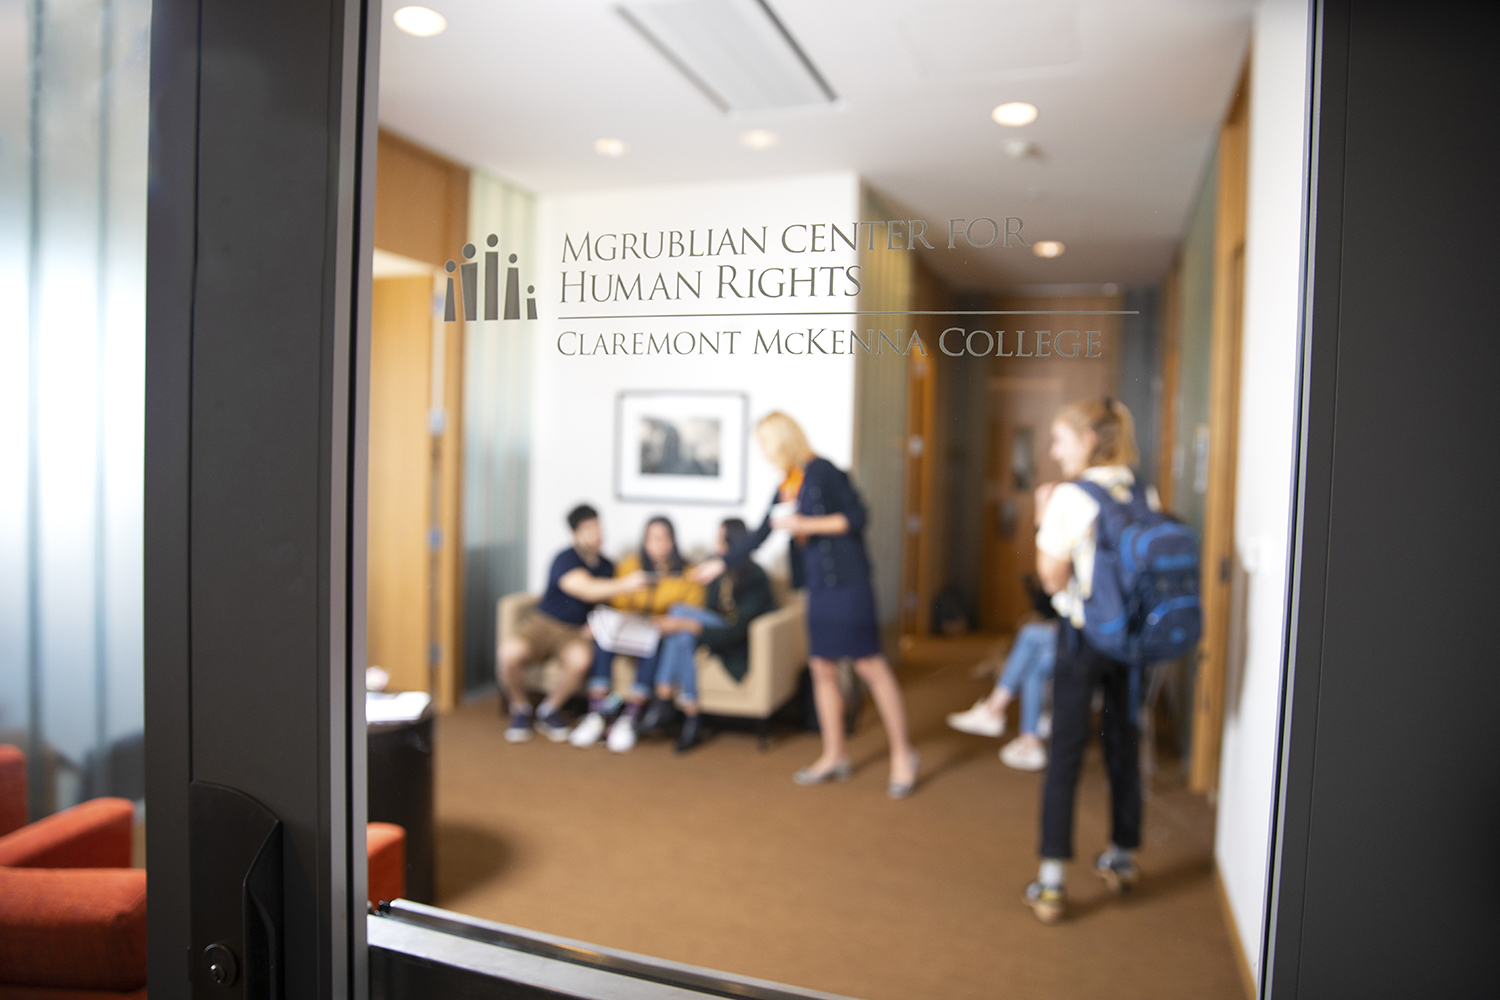 A shot of the Mgrublian Center for Human Rights glass doors shows Wendy greeting students inside.